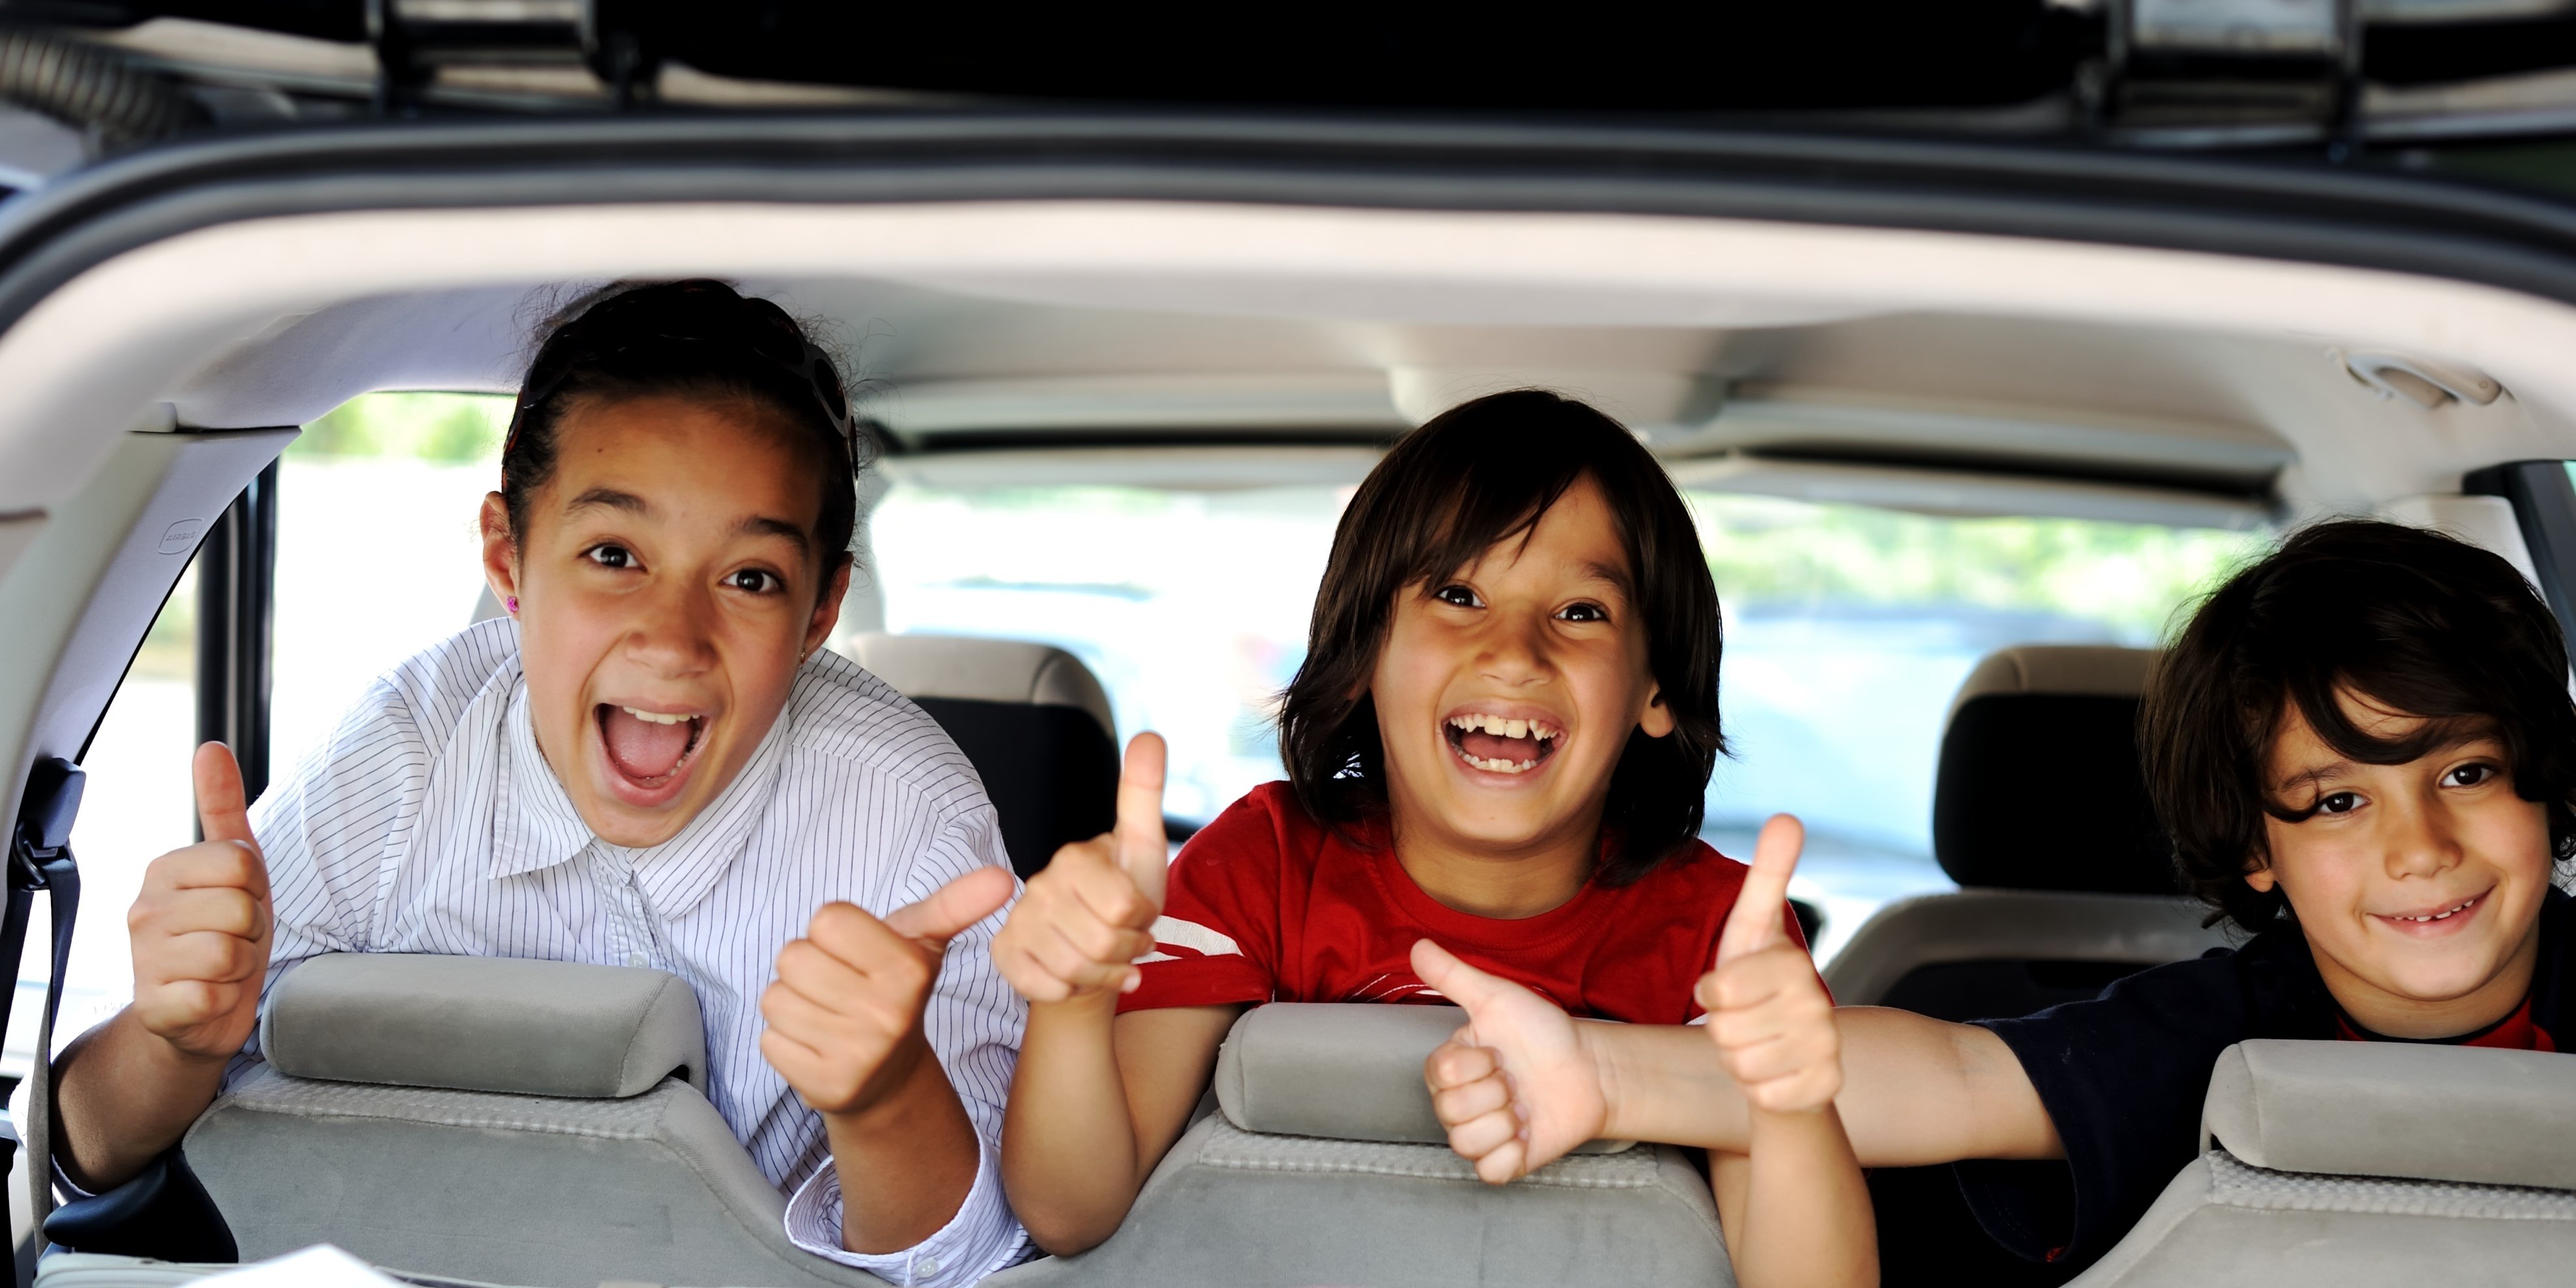 Save Time and Money: Carpool to School